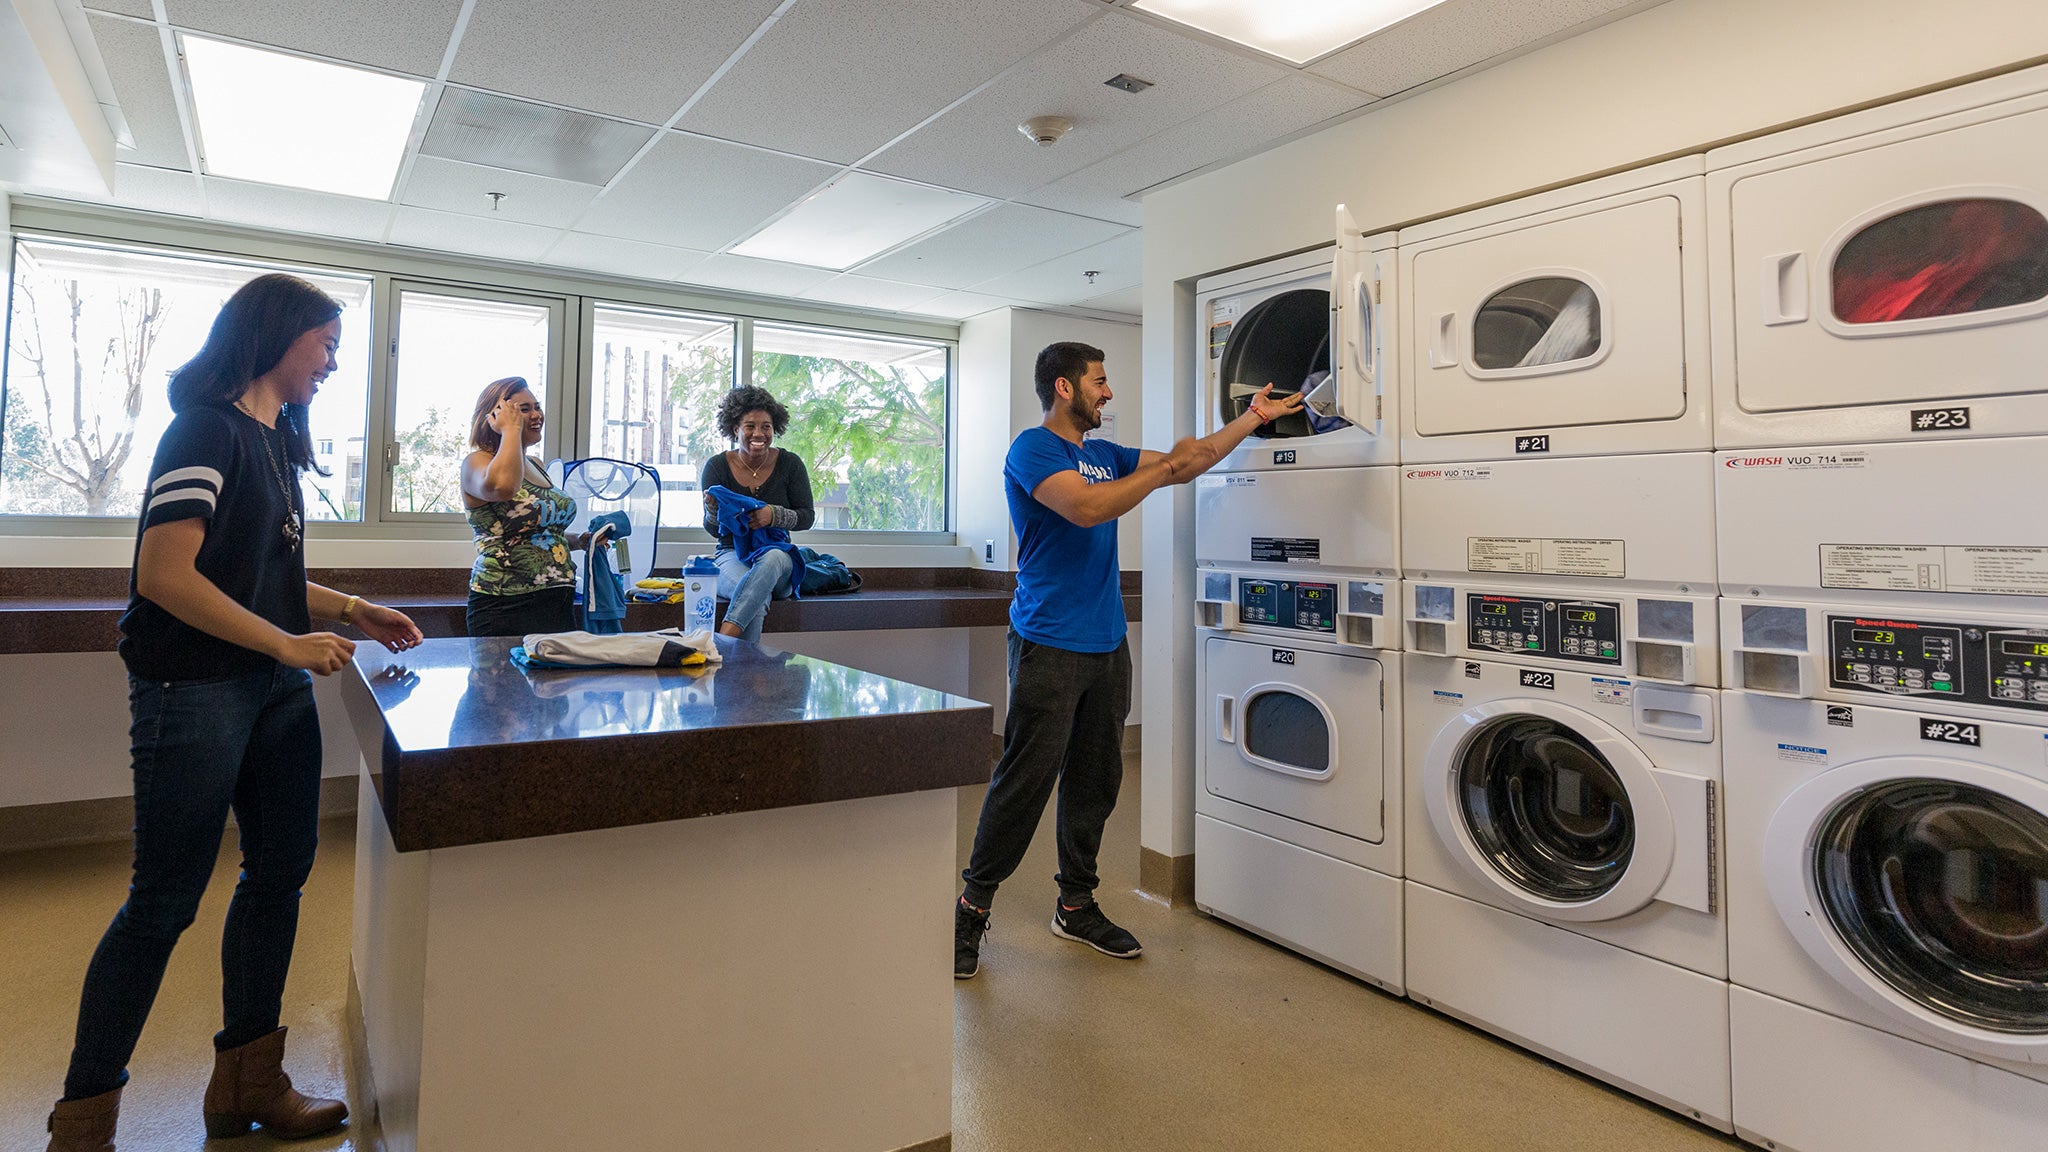 A few students who are doing laundry hang out together in a laundry room.